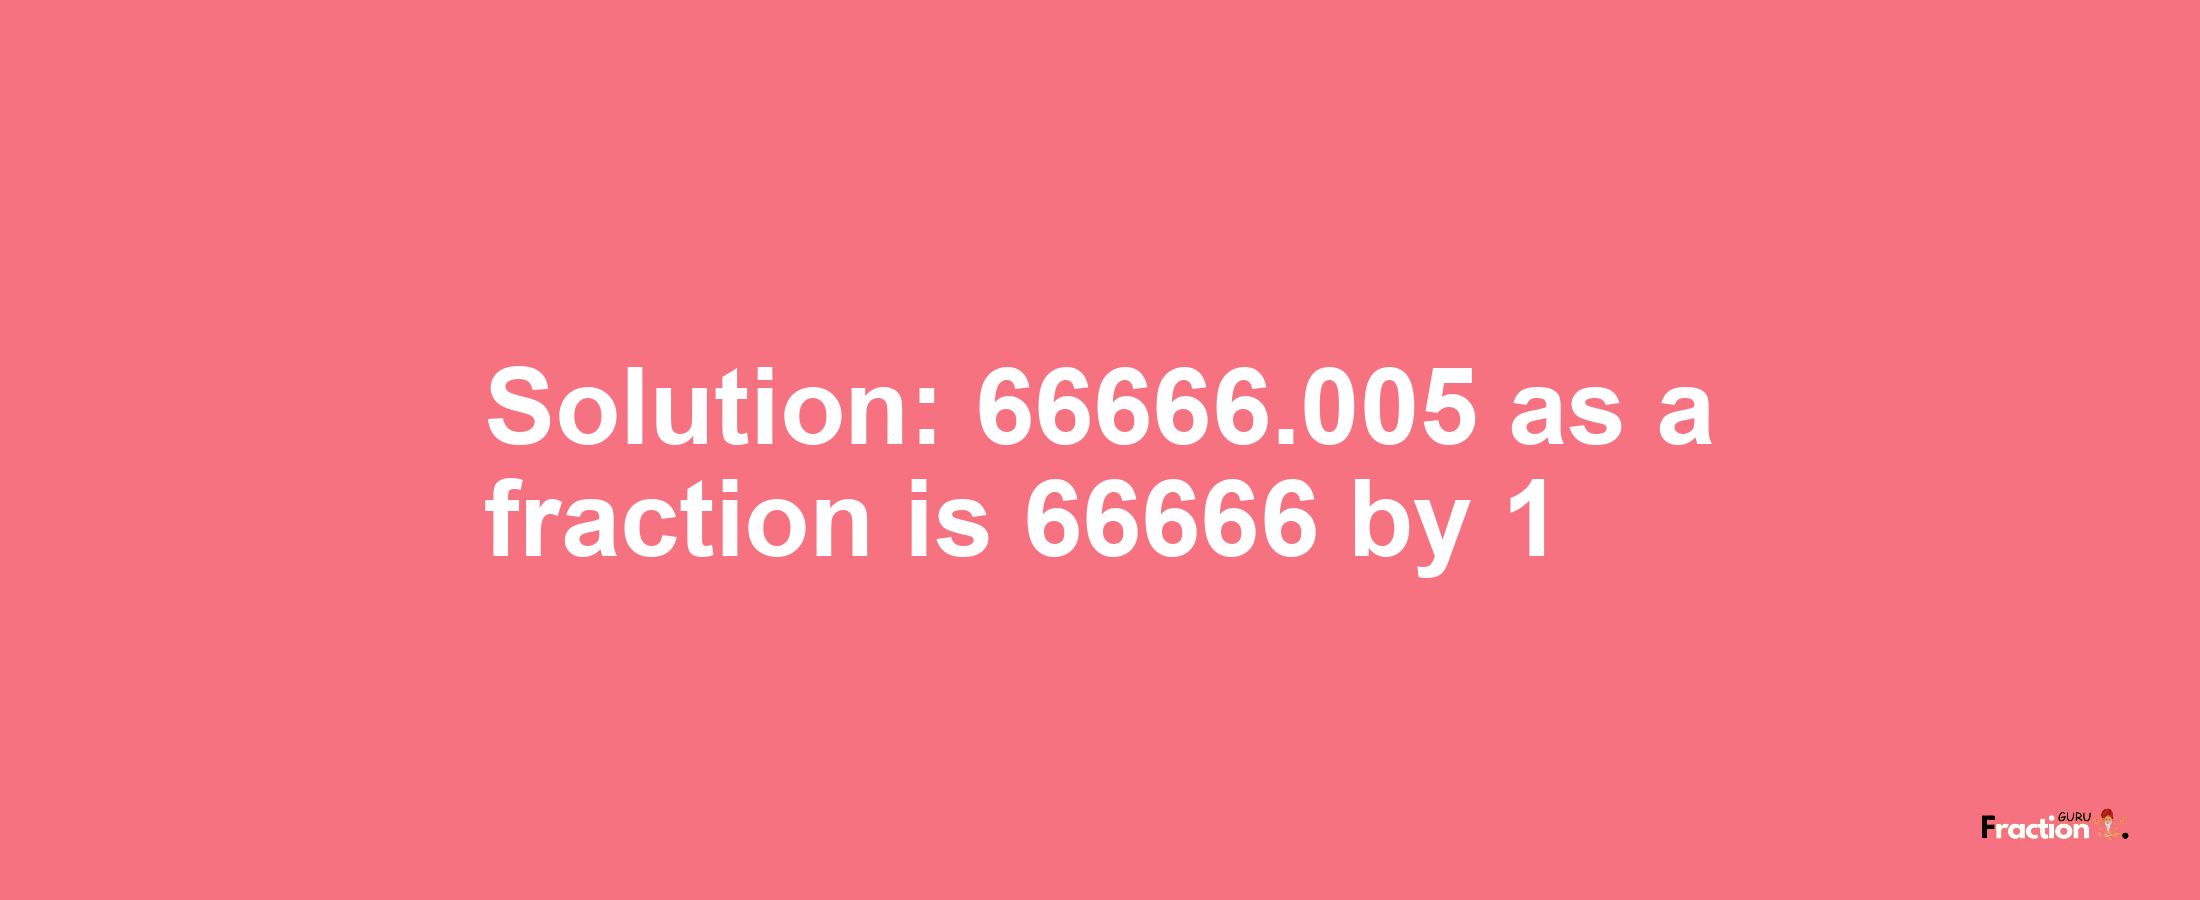 Solution:66666.005 as a fraction is 66666/1